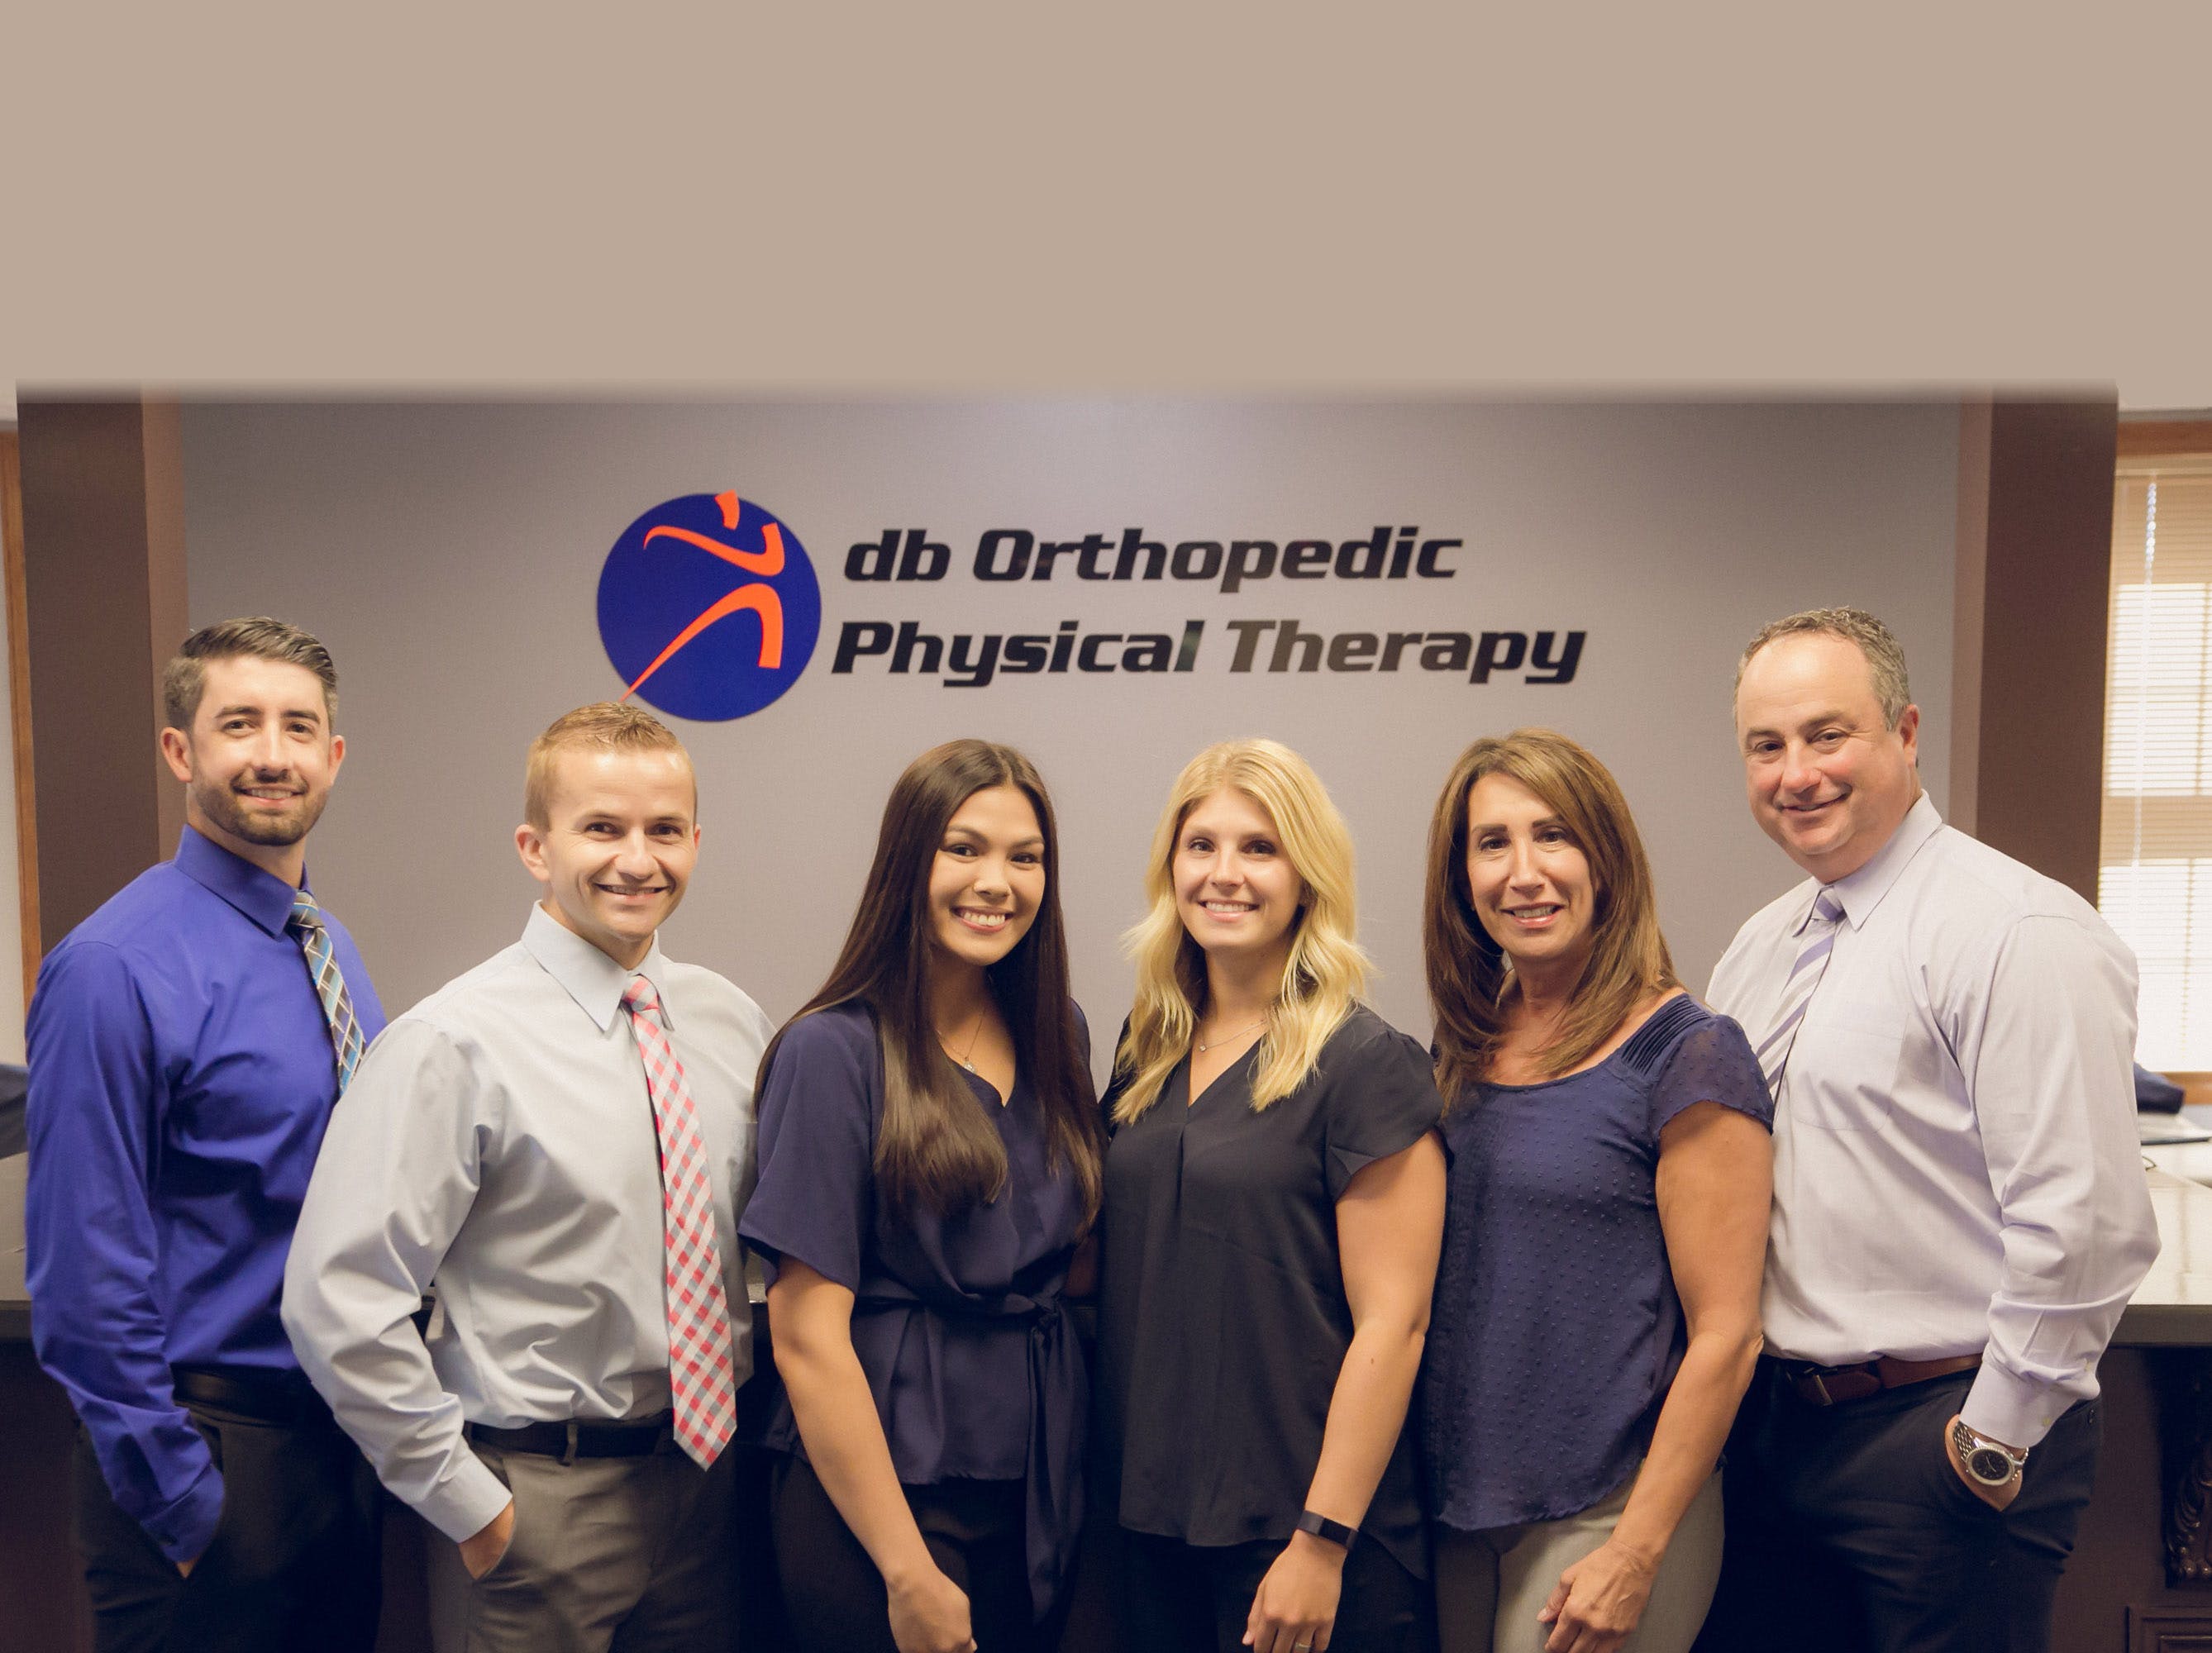 dmg iroquois physical therapy